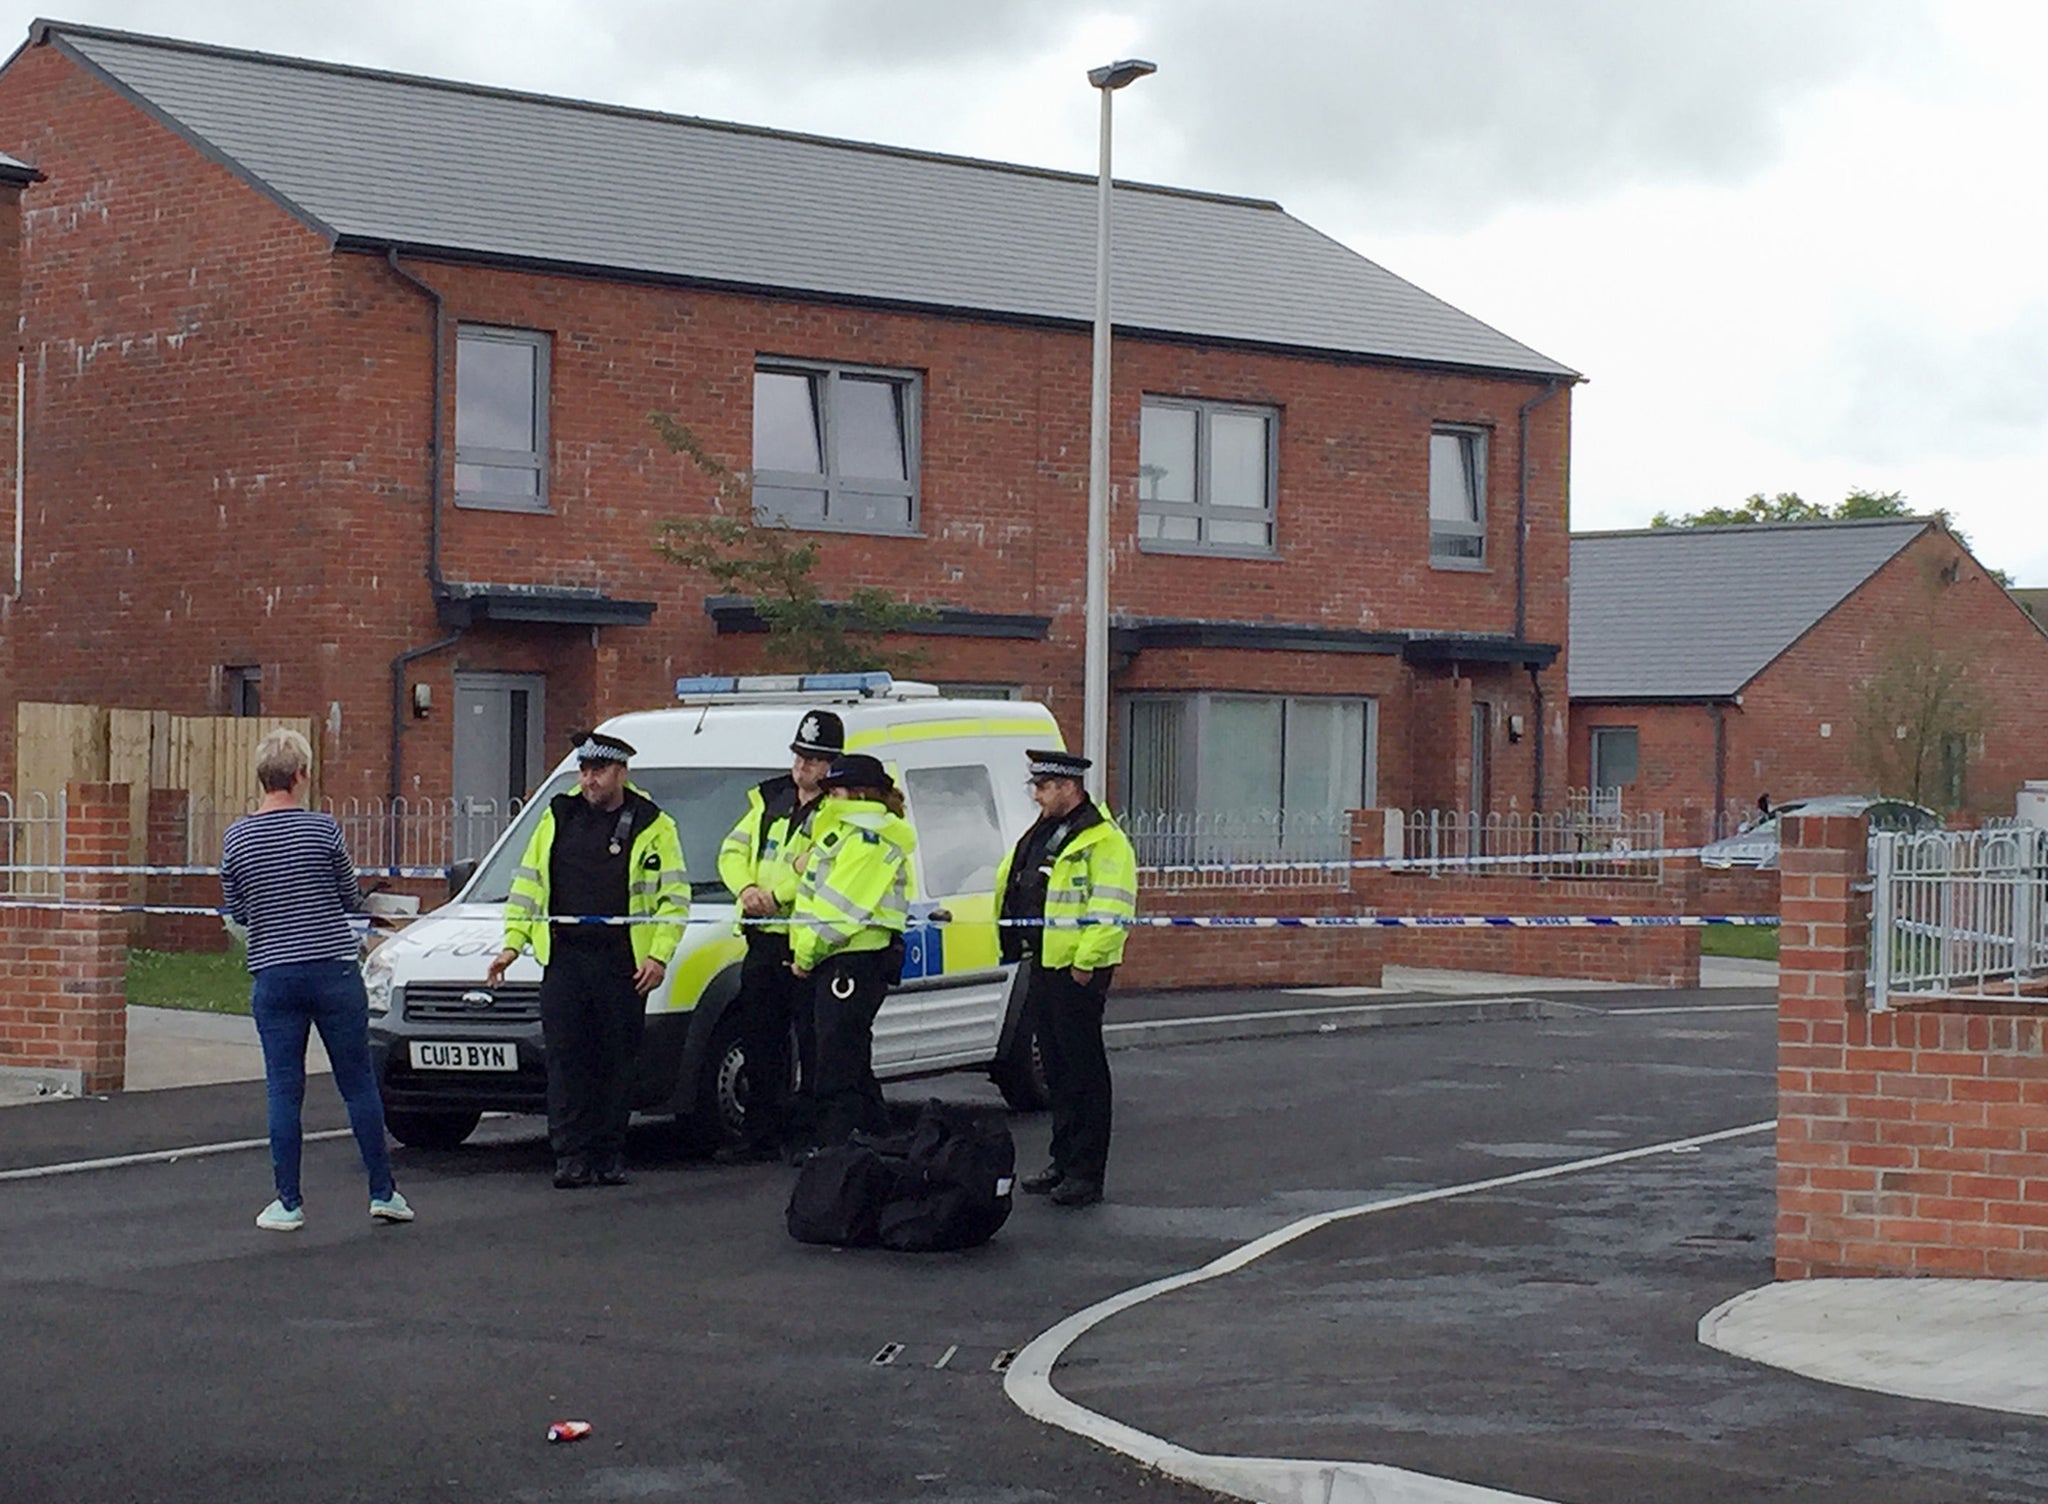 Police in Maes y Bwlch, Llanelli, where a man died following an incident involving a Taser